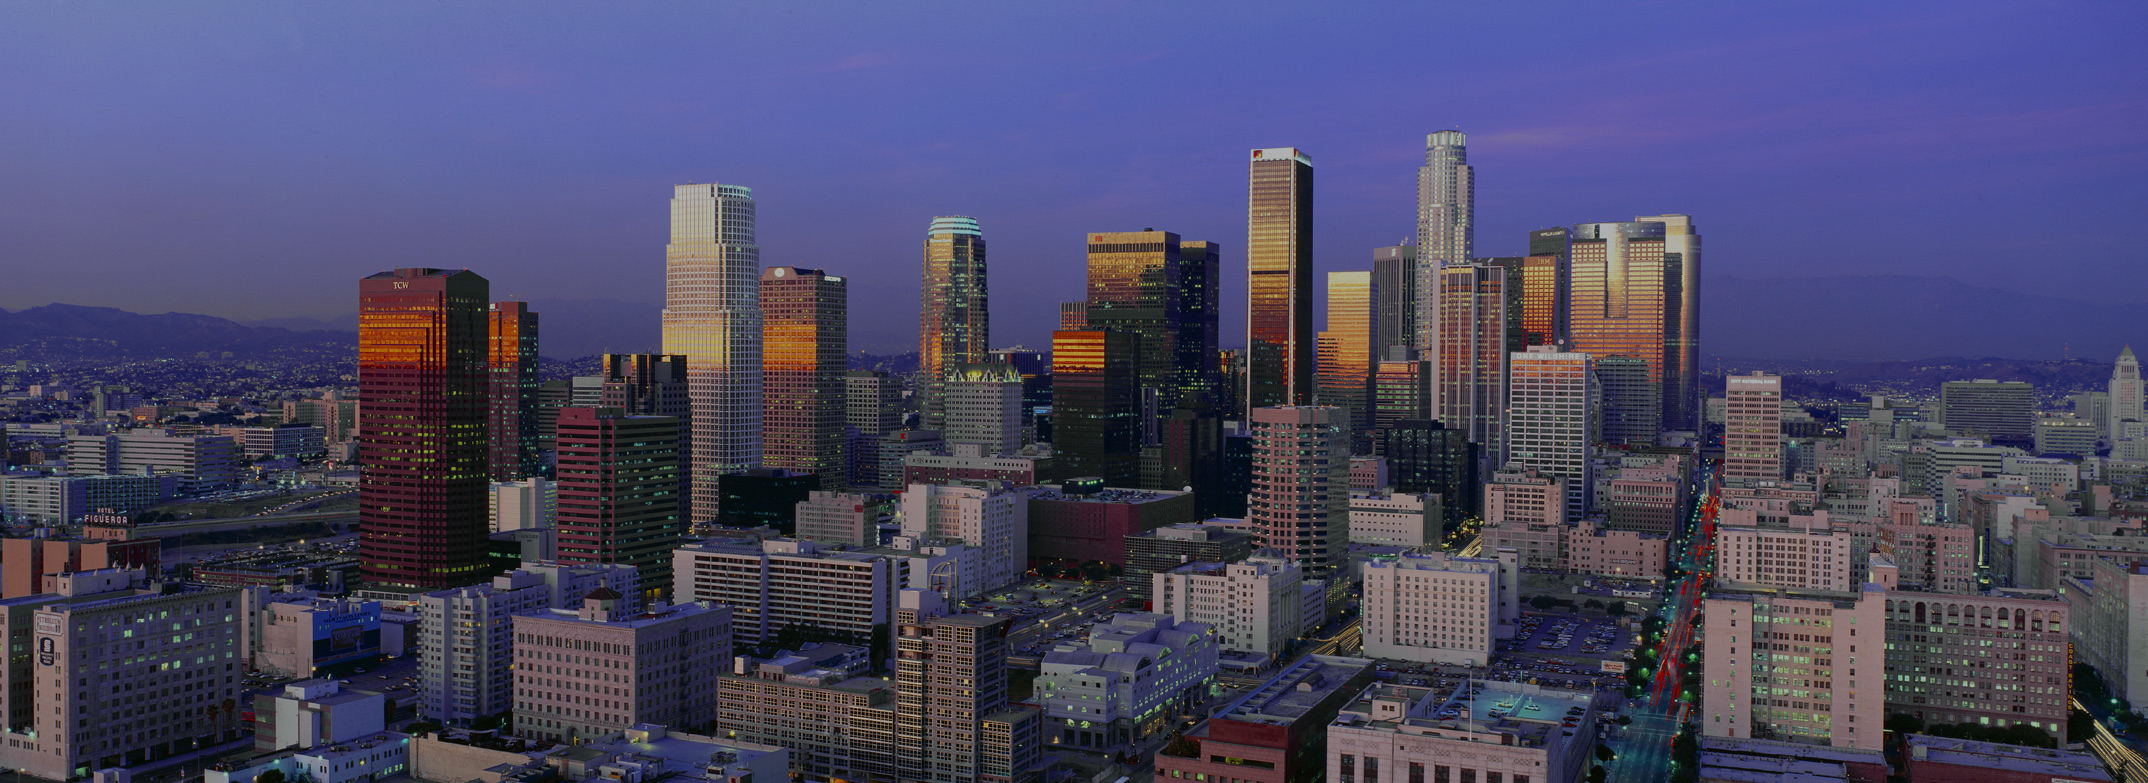 los-angeles-asset-protection-header